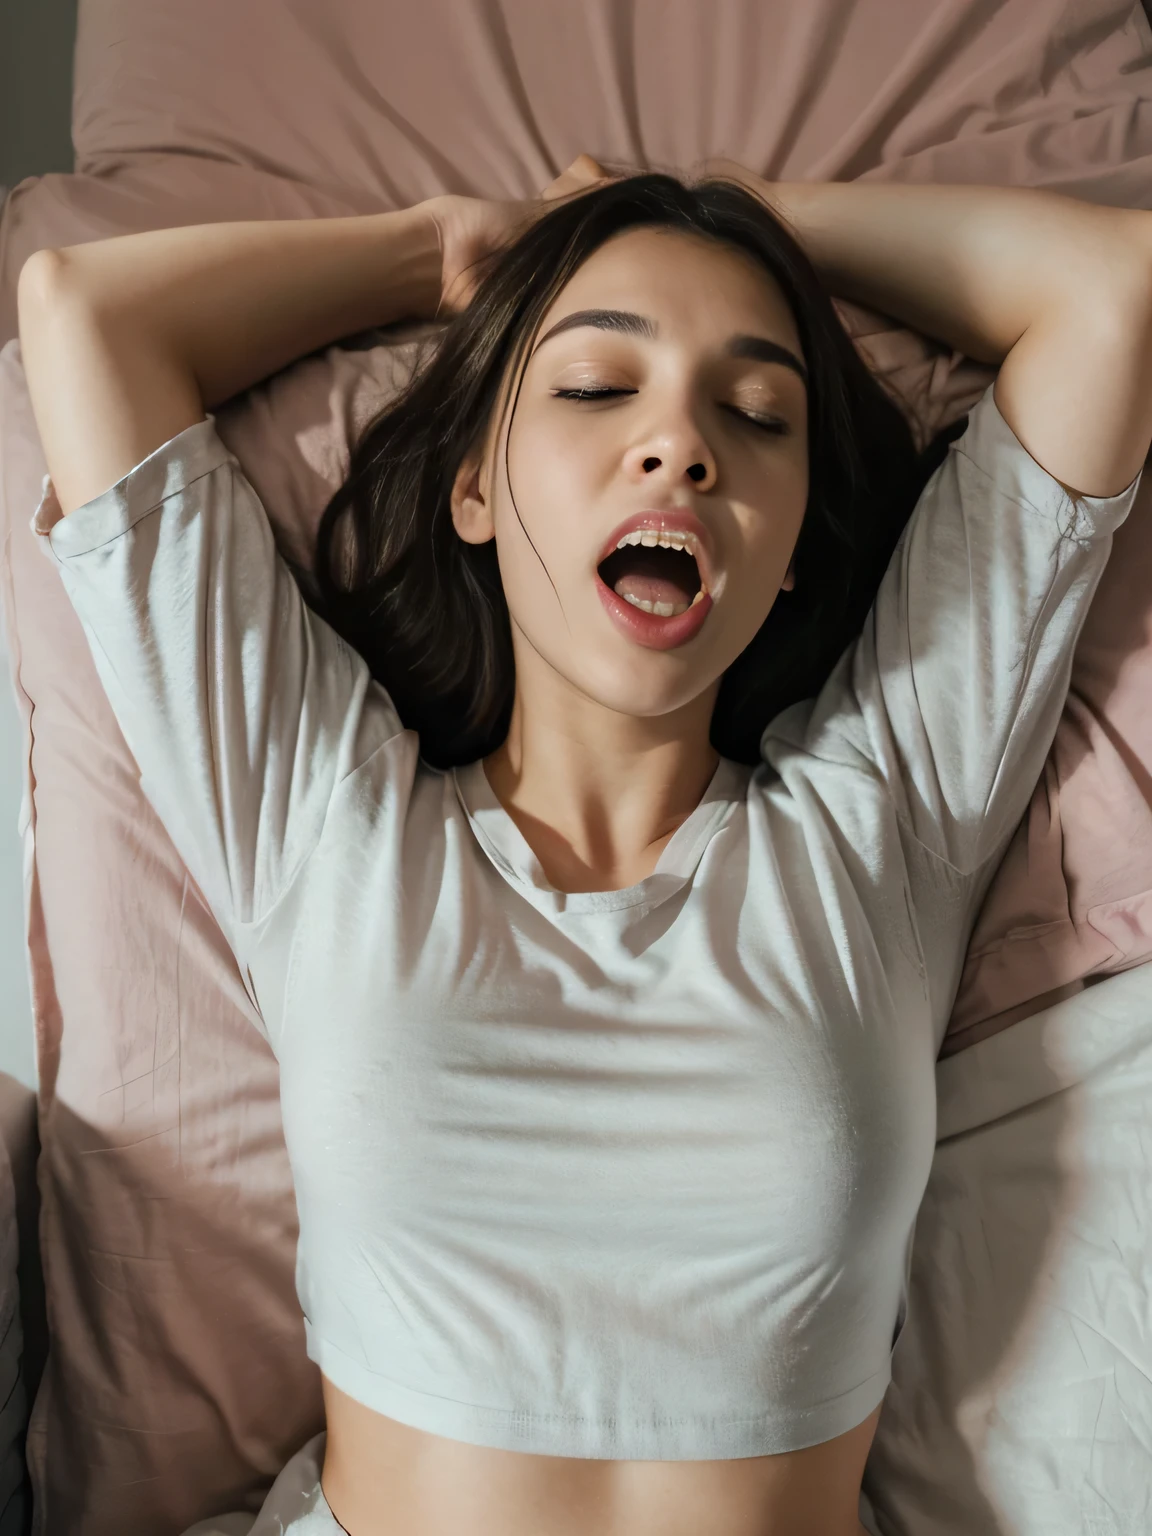 20-year-old girl in pajamas and a black top covered with a sheet on the bed and with her mouth open, the girl&#39;s mouth is big and open,, she has her tongue out, she is very sleepy, ela boceja muito ao mesmo tempo, boca totalmente aberta, ela tem a boca muito aberta, your mouth is exaggeratedly open and showing your tongue, has his eyes closed, facial expression of sleeping and just waking up, she's stretching out (one of the arms up and the other arm is in front of the mouth)